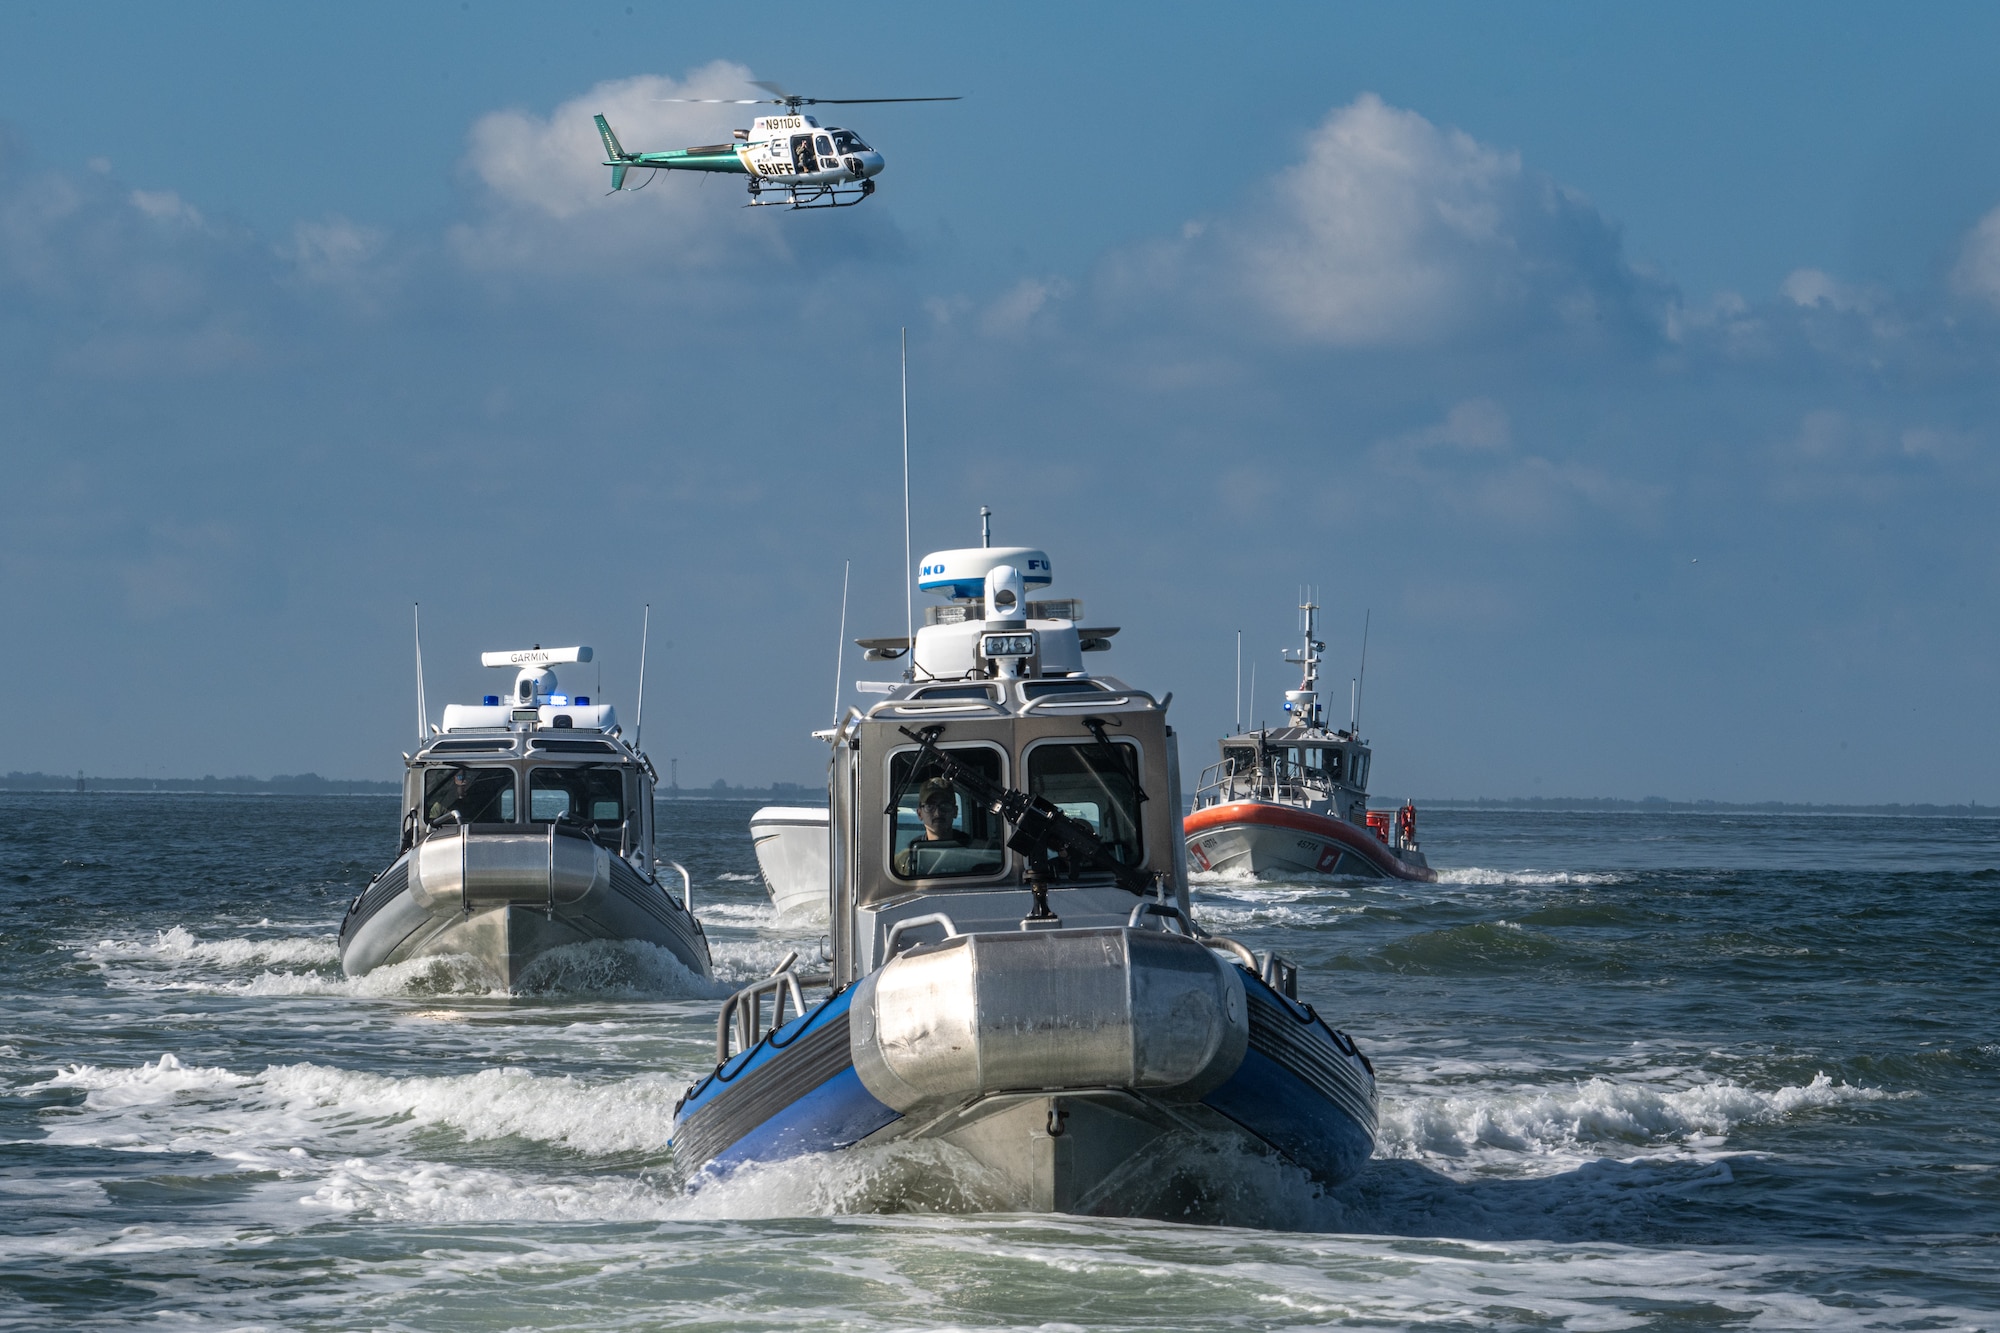 The event demonstrated MacDill’s overwhelming maritime force protection capabilities employed to defend America’s premier power projection platform. (U.S. Air Force photo by Airman 1st Class Zachary Foster)